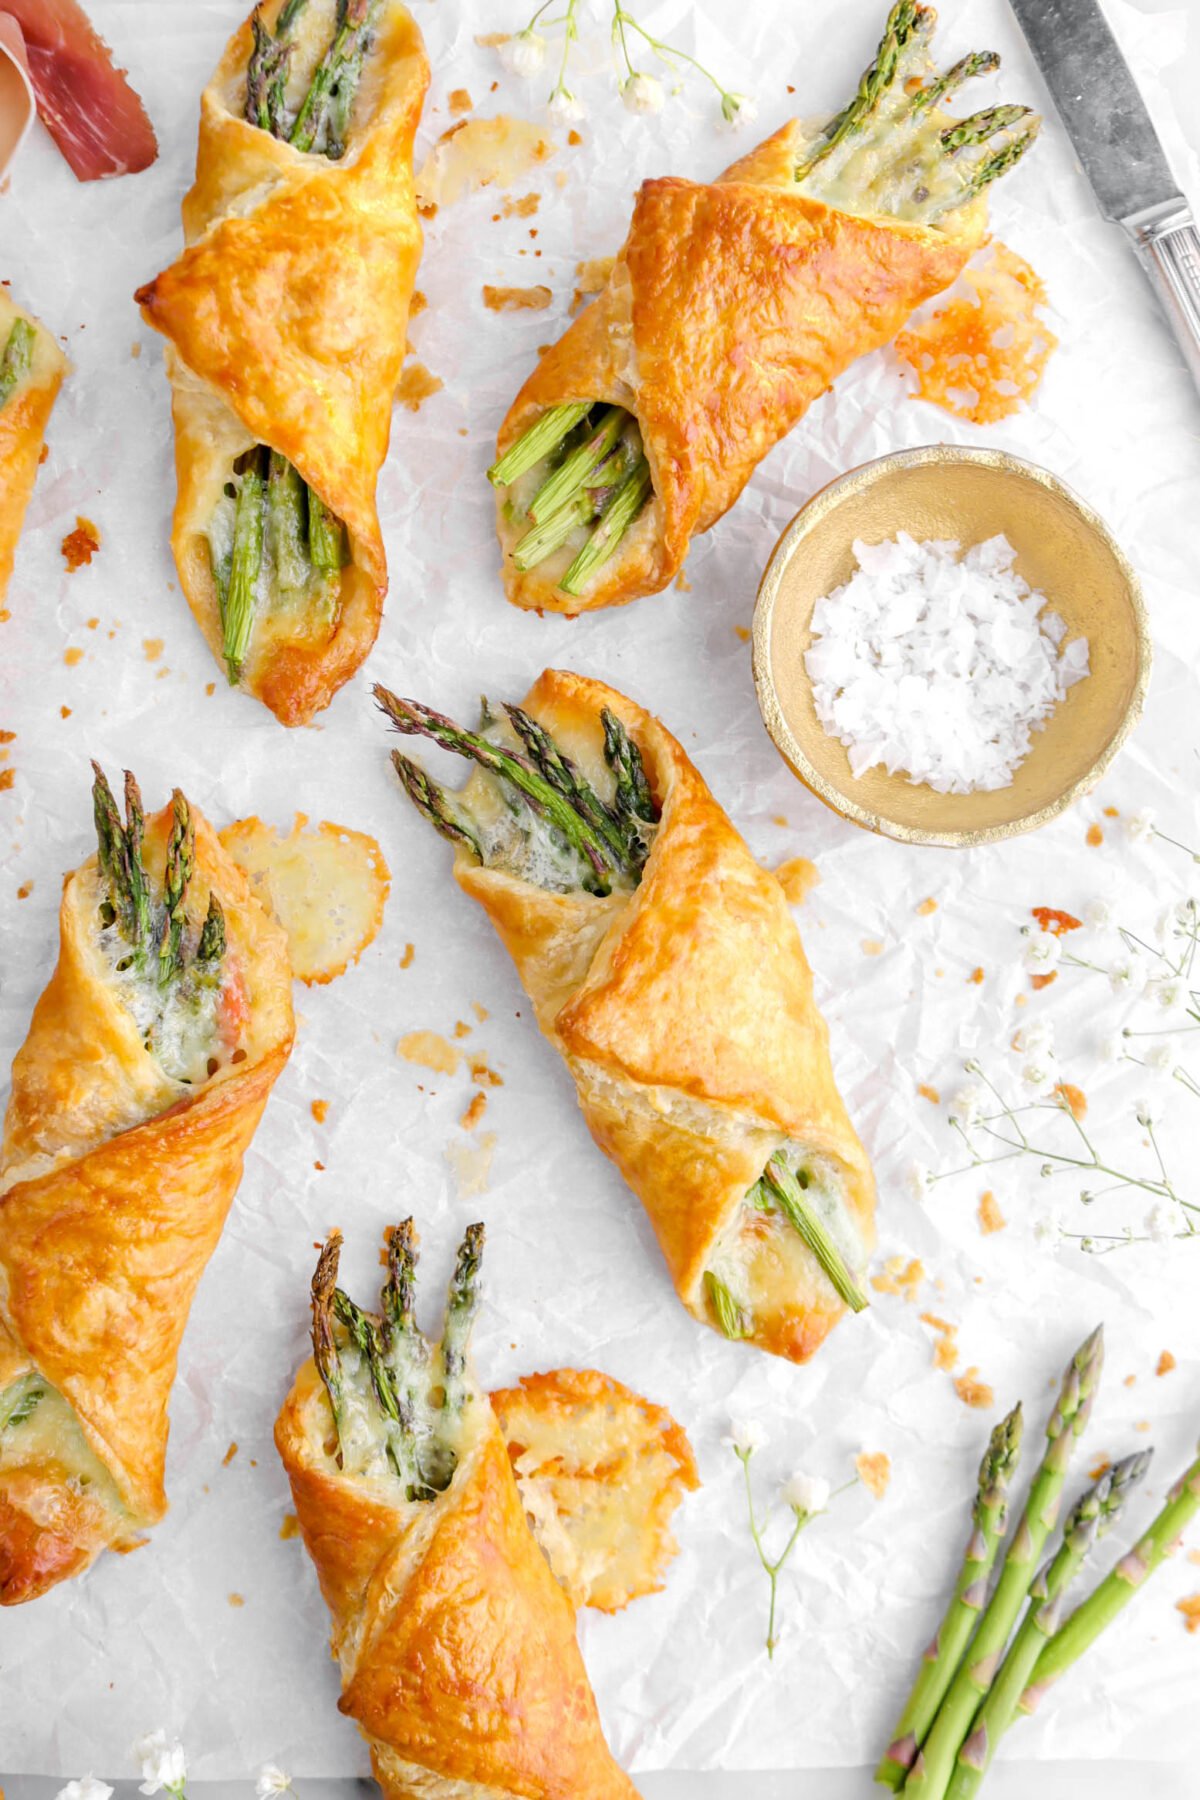 pastry bundles on parchment paper with fresh asparagus and flowers around.